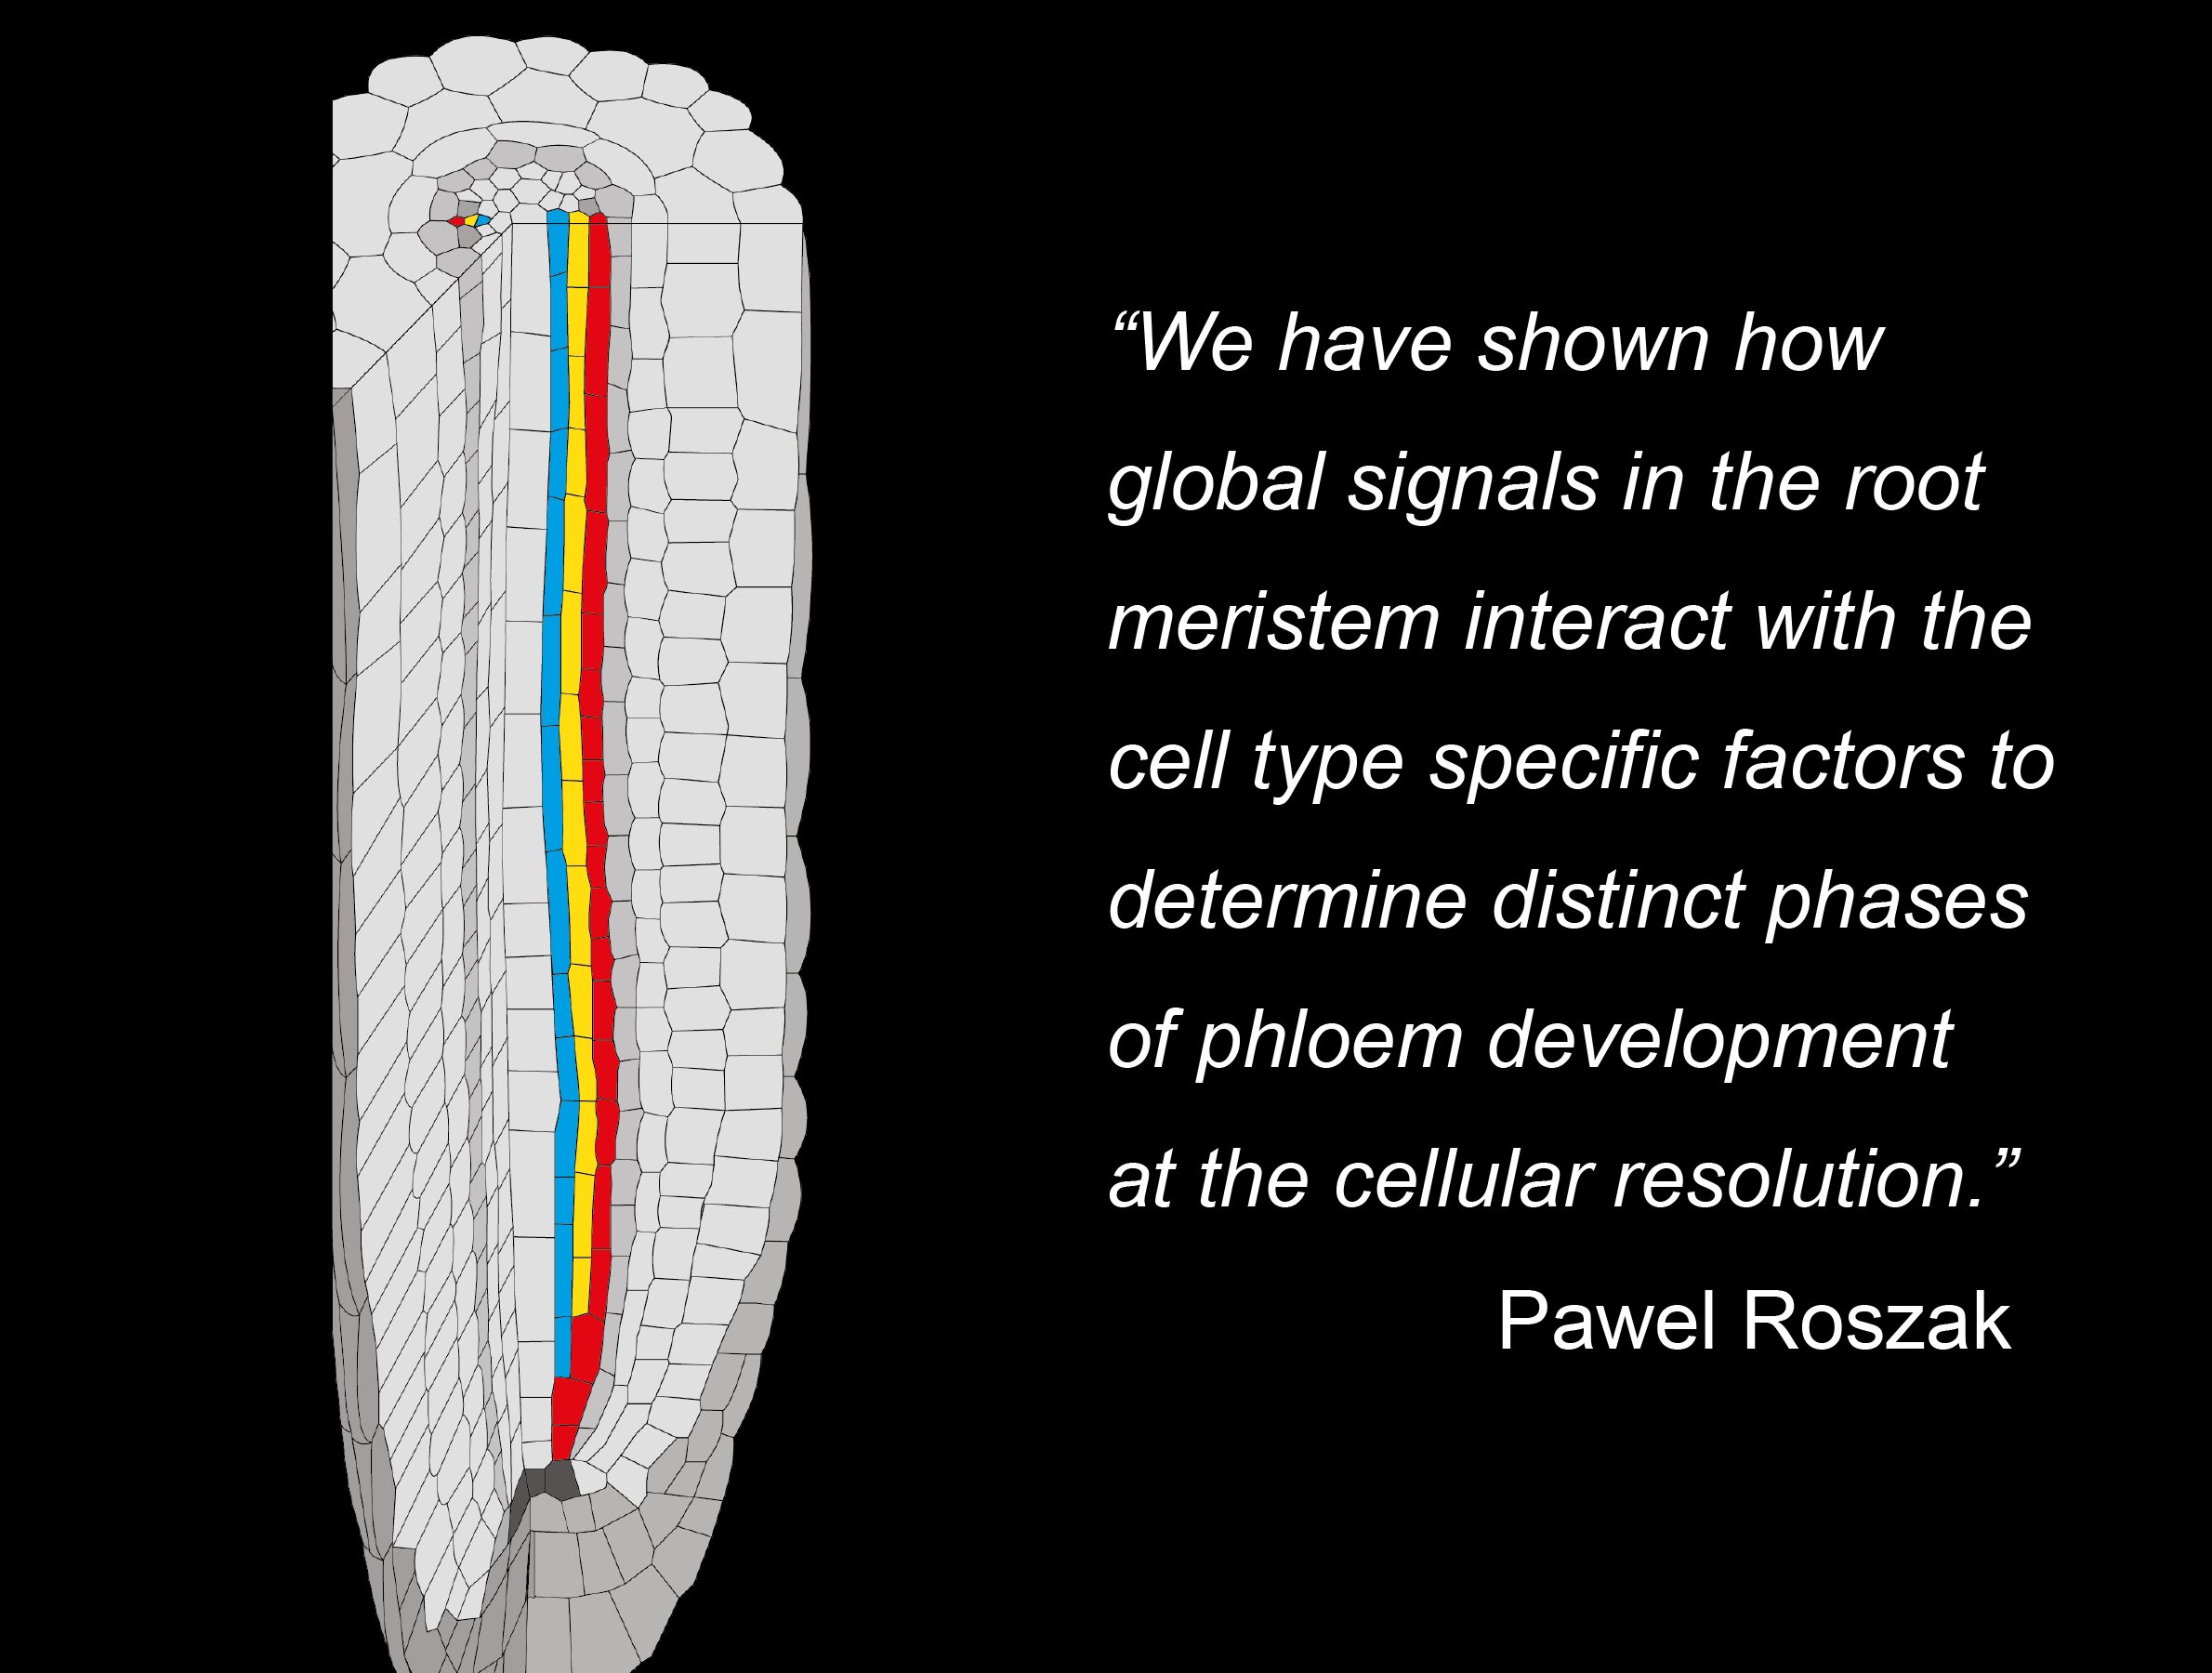 Diagram of phloem in root: “We have shown how global signals in the root meristem interact with the cell type specific factors to determine distinct phases of phloem development at the cellular resolution.” Pawel Roszak